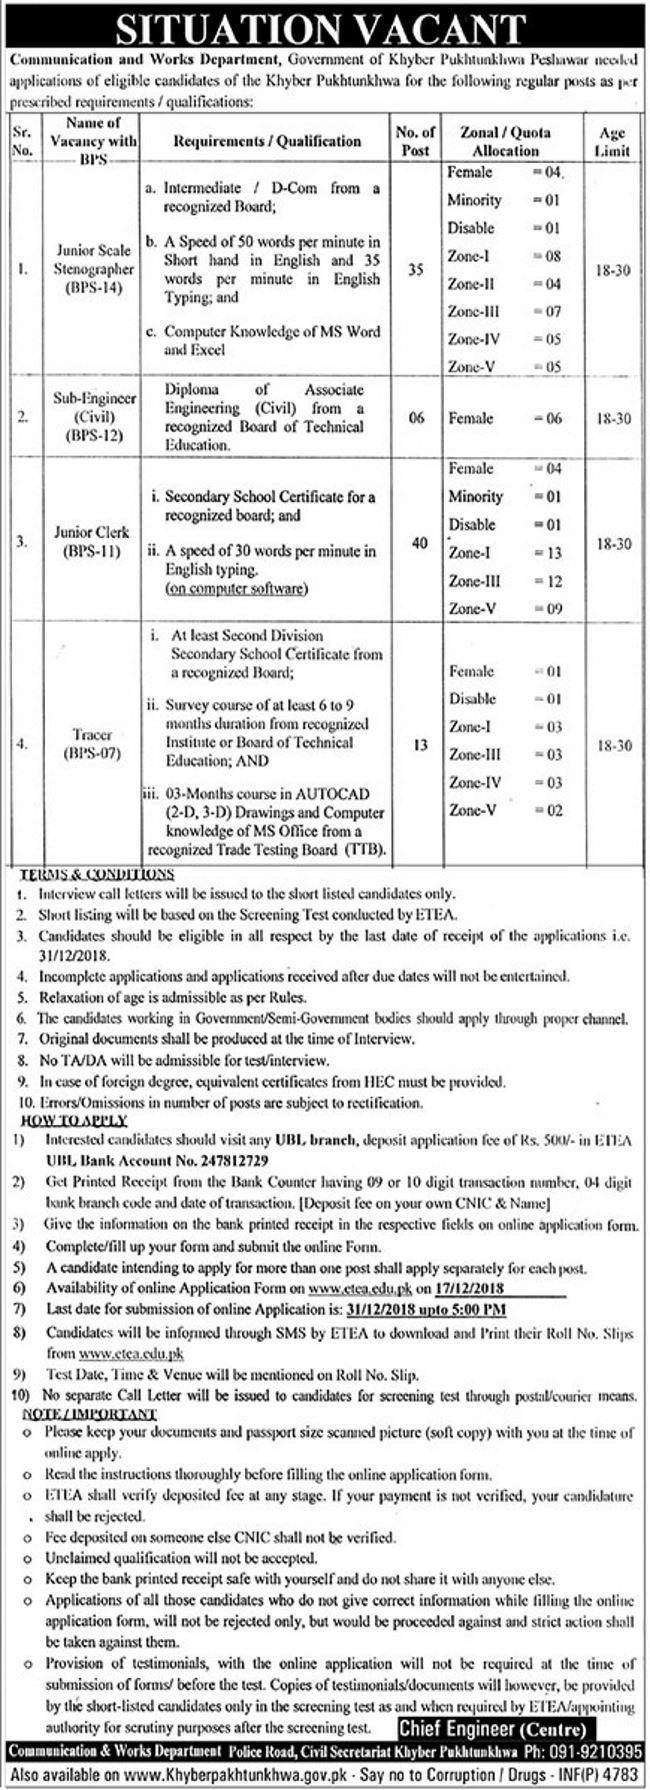 KP Communication & Works Department Jobs 2019 for 94+ Jr Clerks, Stenographers, Sub-Engineers and Tracers